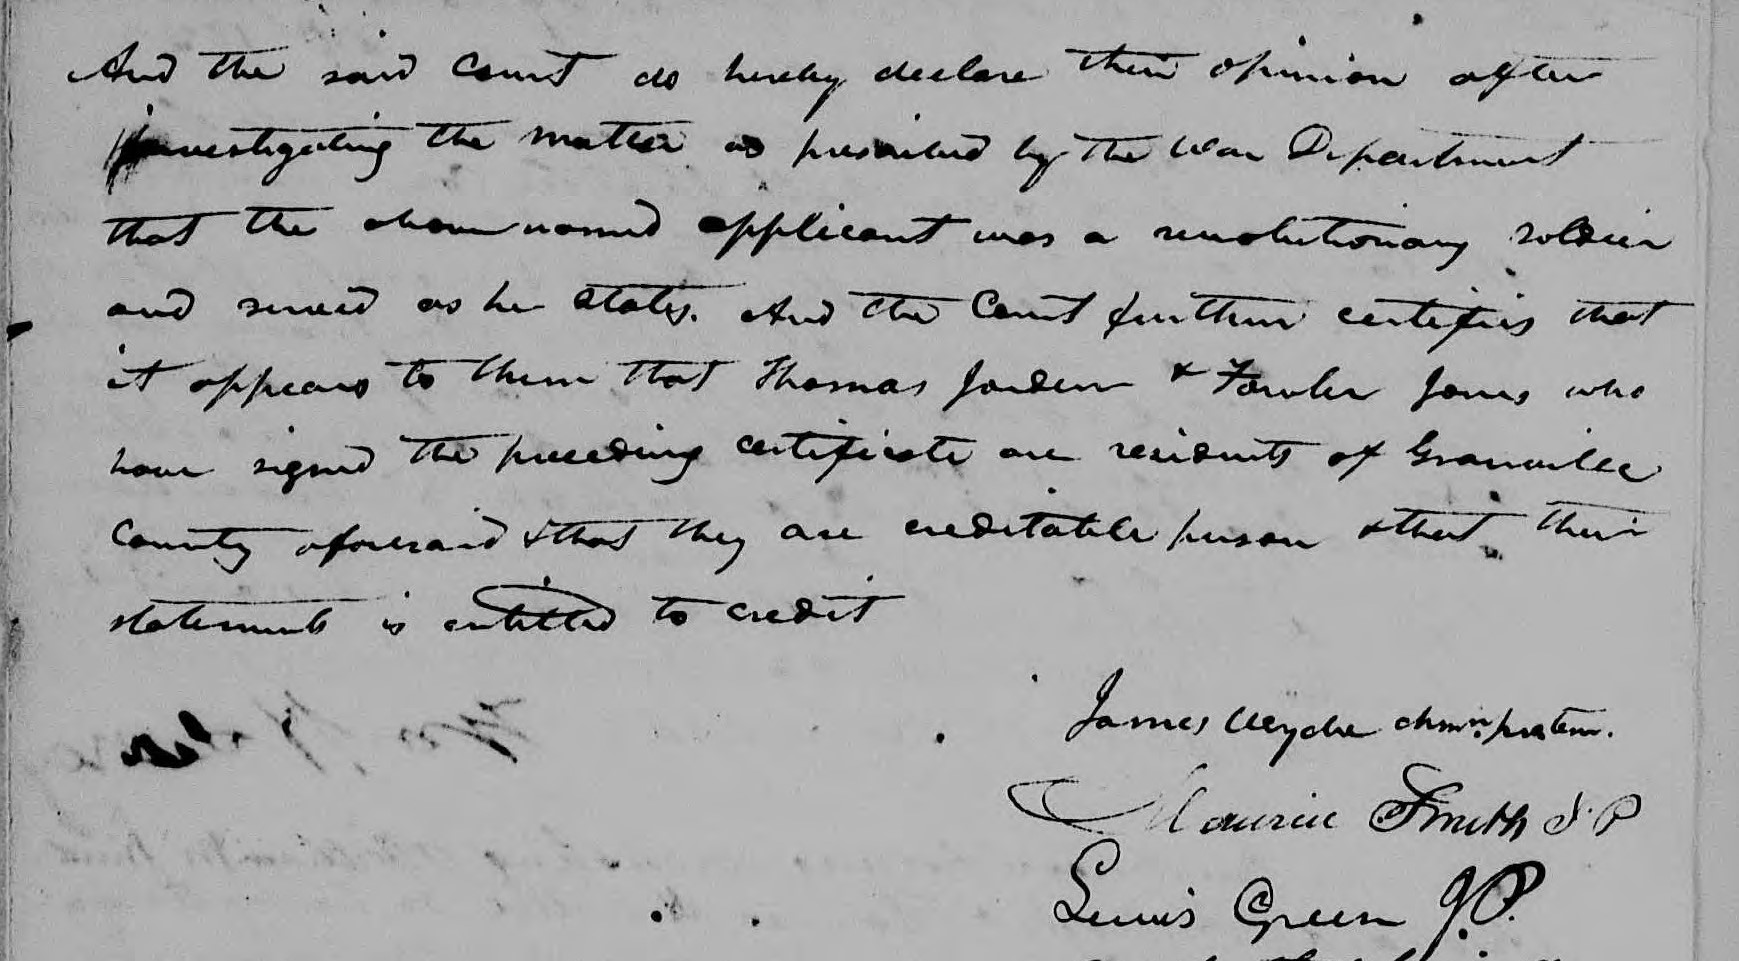 Application for a Veteran's Pension from William Taburn, 10 August 1832, page 6